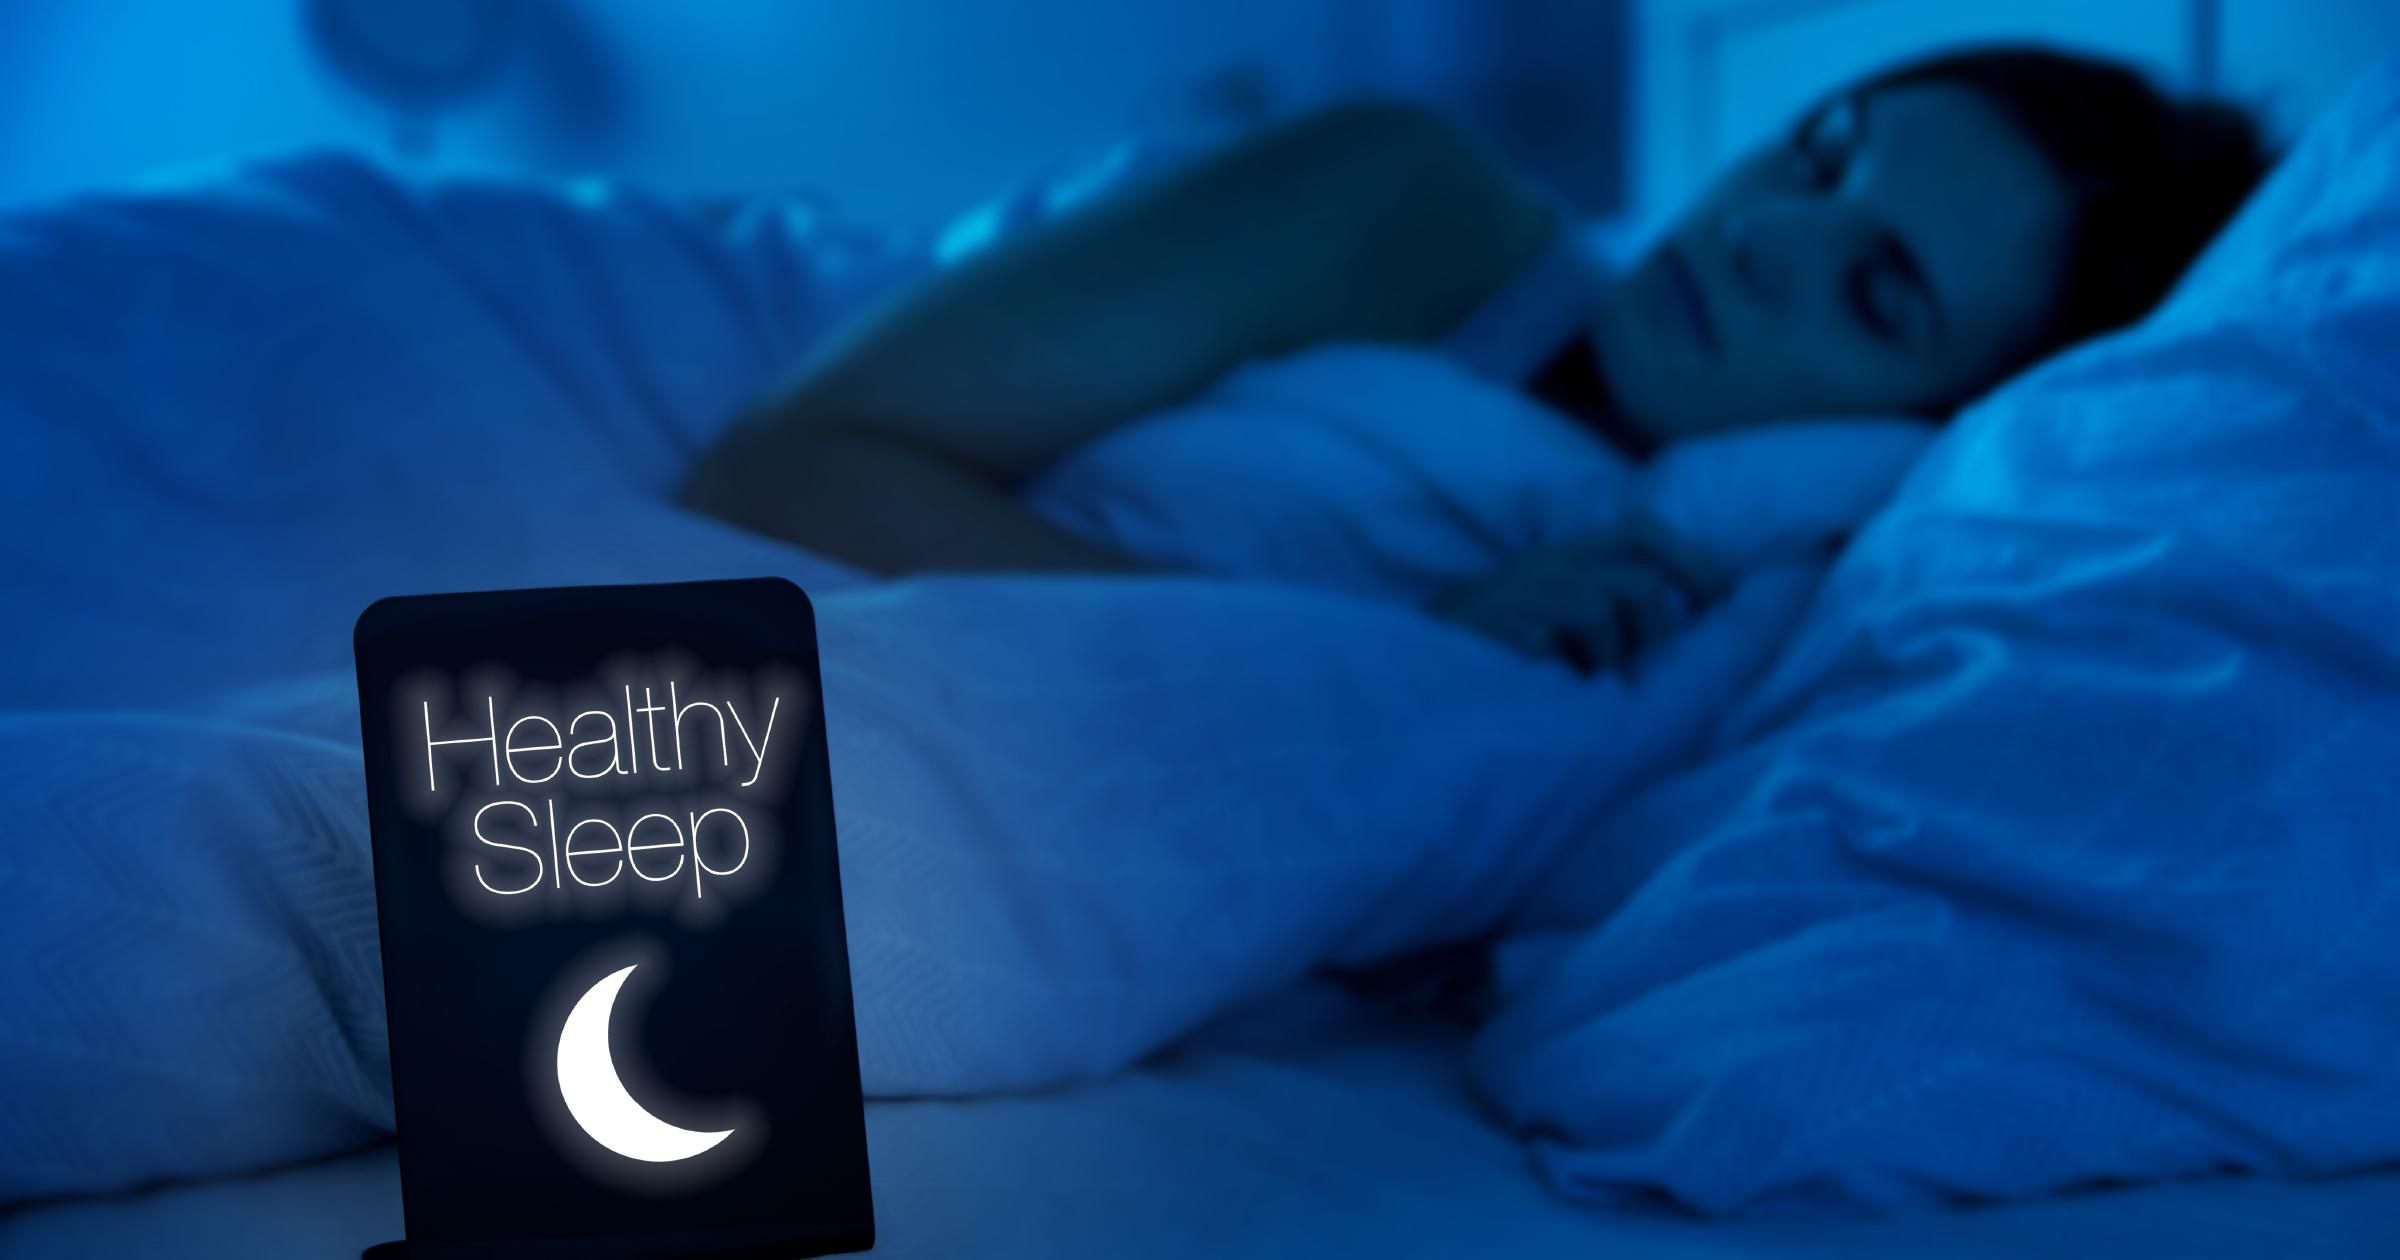 WHAT DOES YOUR SLEEP STATE REFLECT ABOUT YOUR HEALTH?